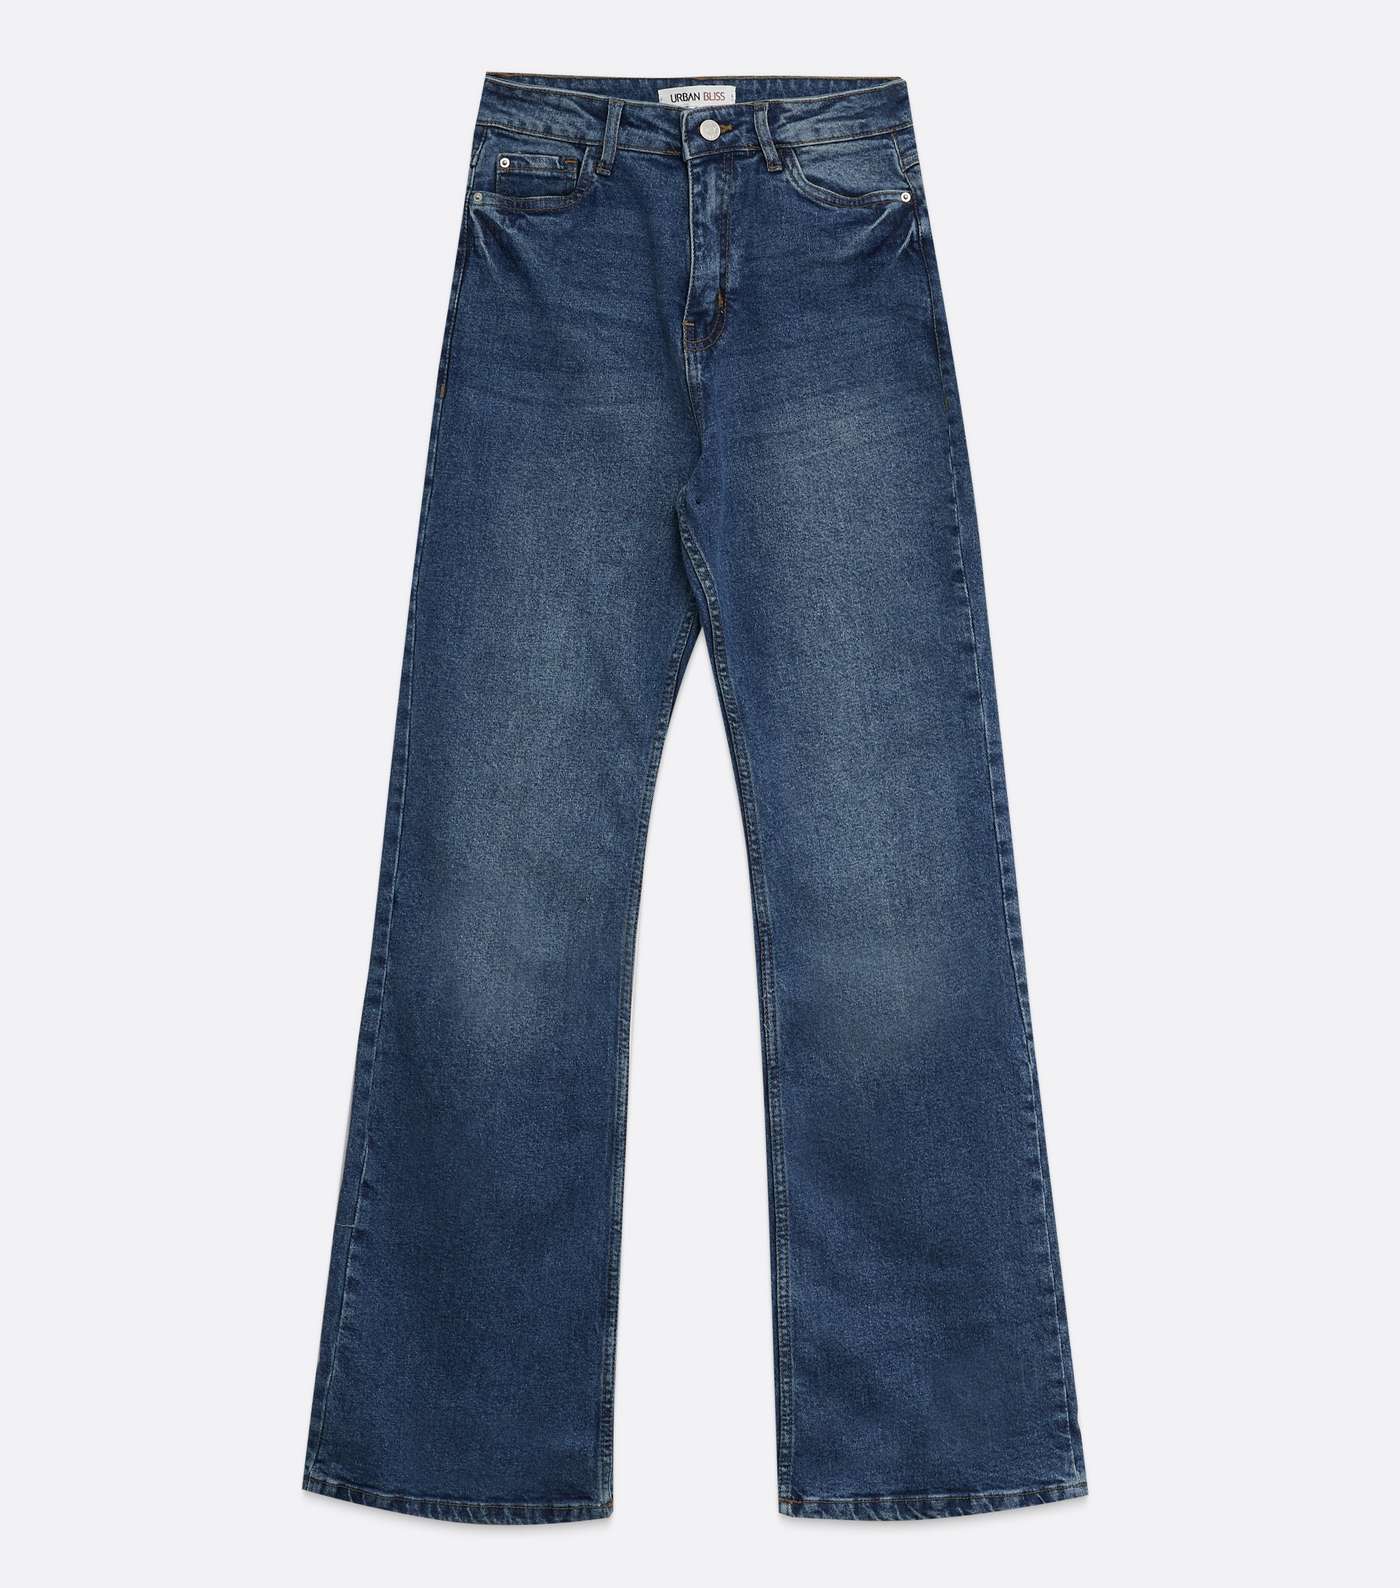 Urban Bliss Blue Rinse Wash Flared Jeans Image 5